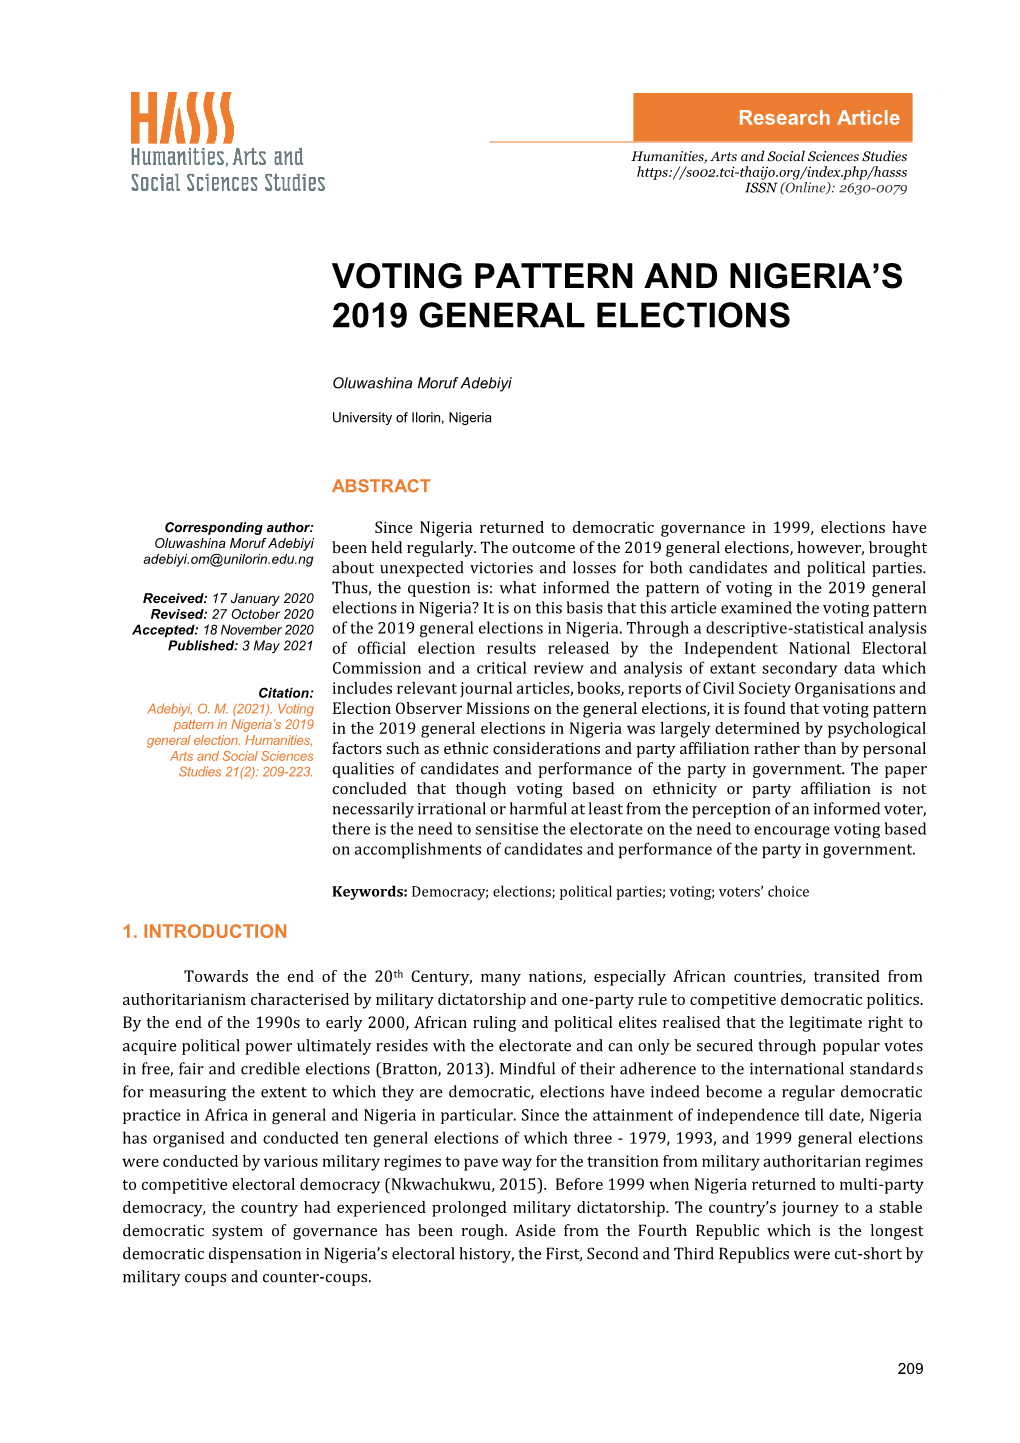 Voting Pattern and Nigeria's 2019 General Elections